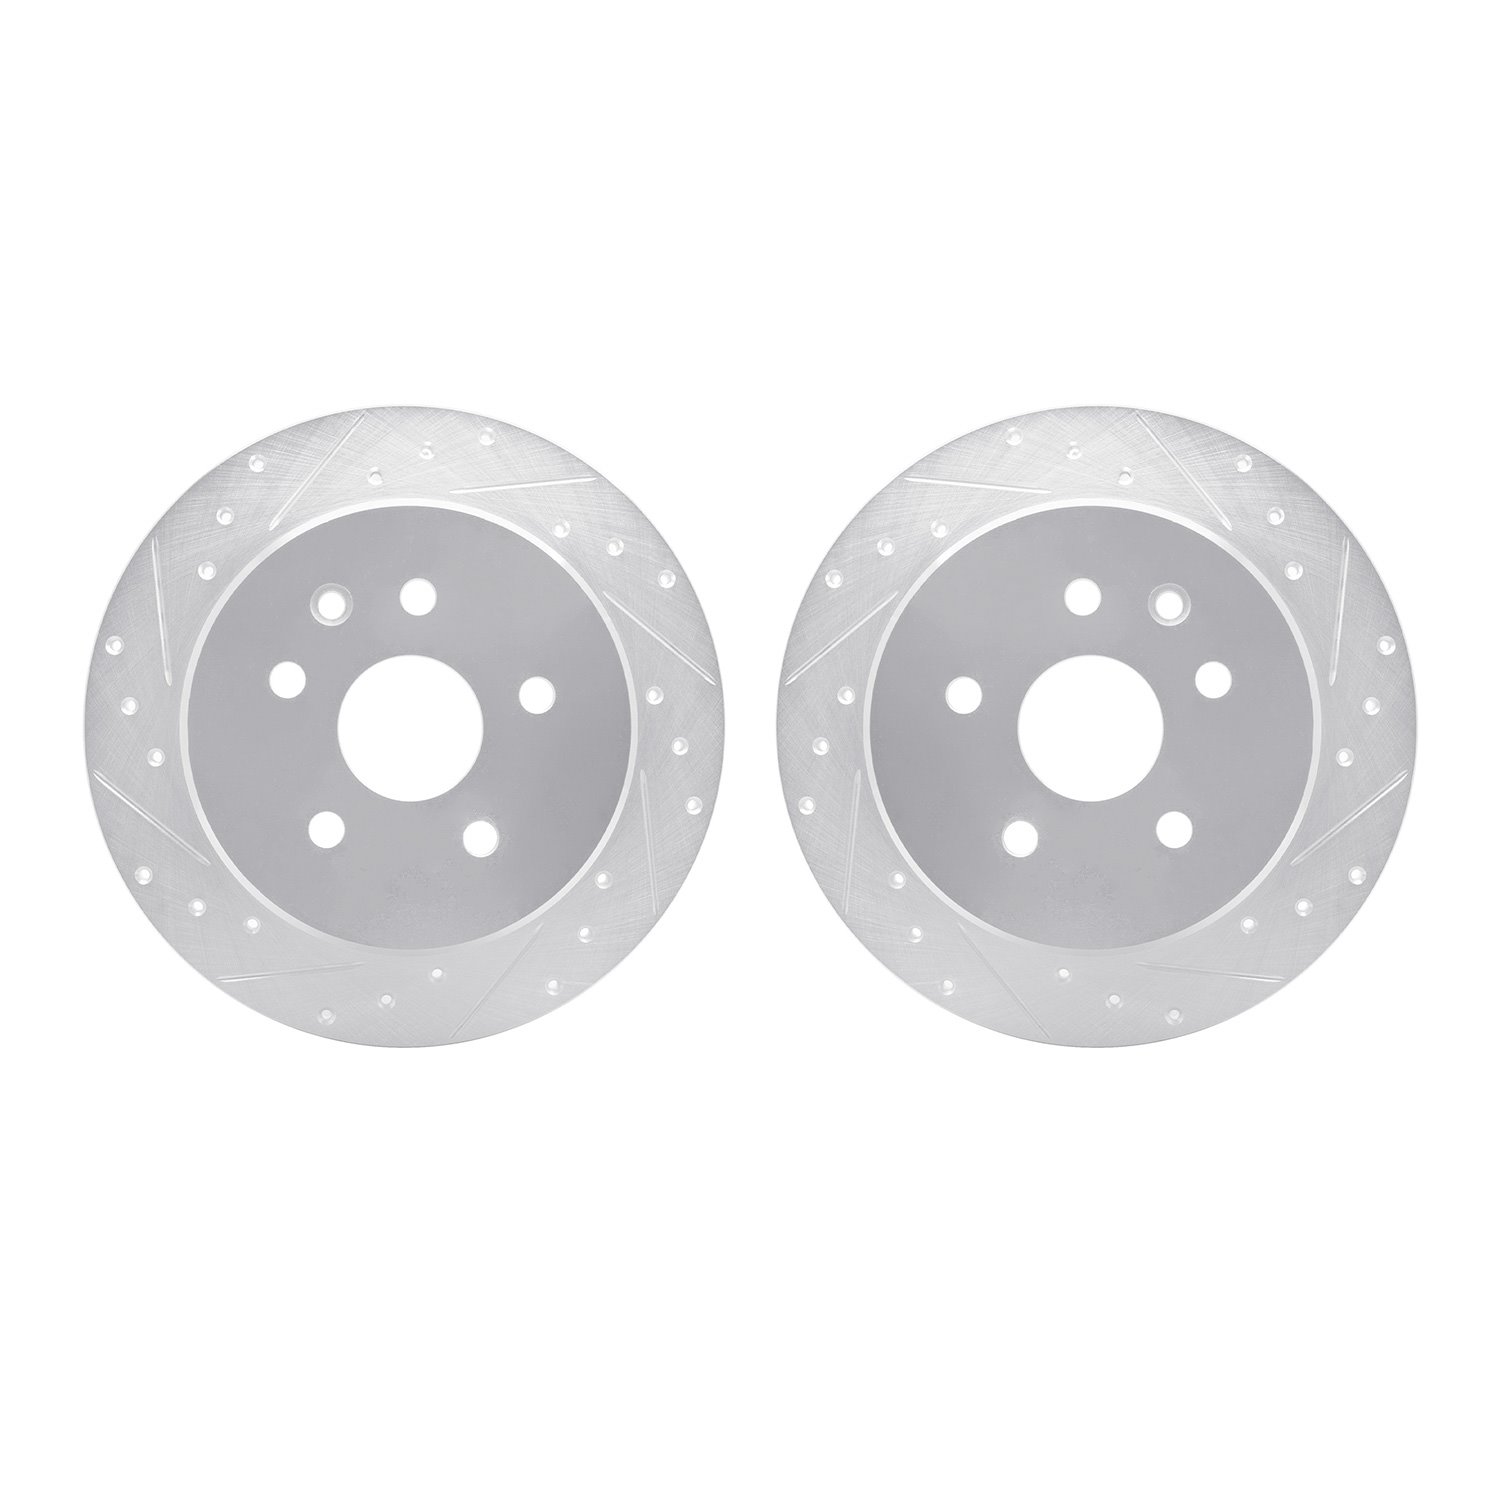 7002-75025 Drilled/Slotted Brake Rotors [Silver], 1998-2010 Lexus/Toyota/Scion, Position: Rear